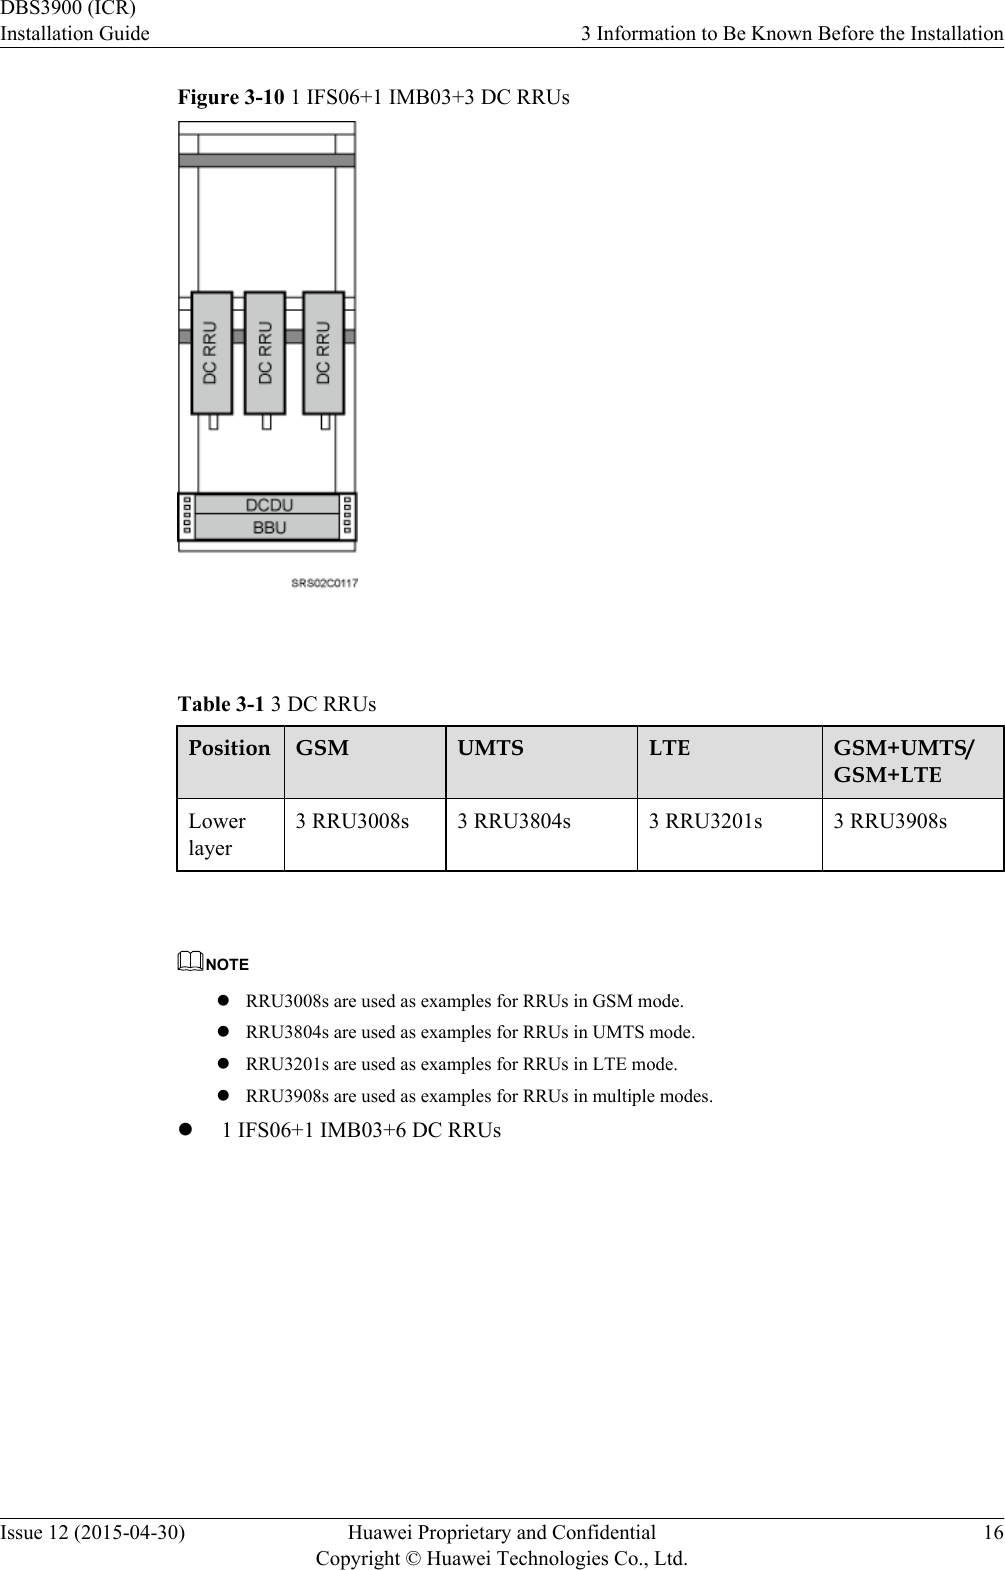 Figure 3-10 1 IFS06+1 IMB03+3 DC RRUs Table 3-1 3 DC RRUsPosition GSM UMTS LTE GSM+UMTS/GSM+LTELowerlayer3 RRU3008s 3 RRU3804s 3 RRU3201s 3 RRU3908s NOTElRRU3008s are used as examples for RRUs in GSM mode.lRRU3804s are used as examples for RRUs in UMTS mode.lRRU3201s are used as examples for RRUs in LTE mode.lRRU3908s are used as examples for RRUs in multiple modes.l1 IFS06+1 IMB03+6 DC RRUsDBS3900 (ICR)Installation Guide 3 Information to Be Known Before the InstallationIssue 12 (2015-04-30) Huawei Proprietary and ConfidentialCopyright © Huawei Technologies Co., Ltd.16